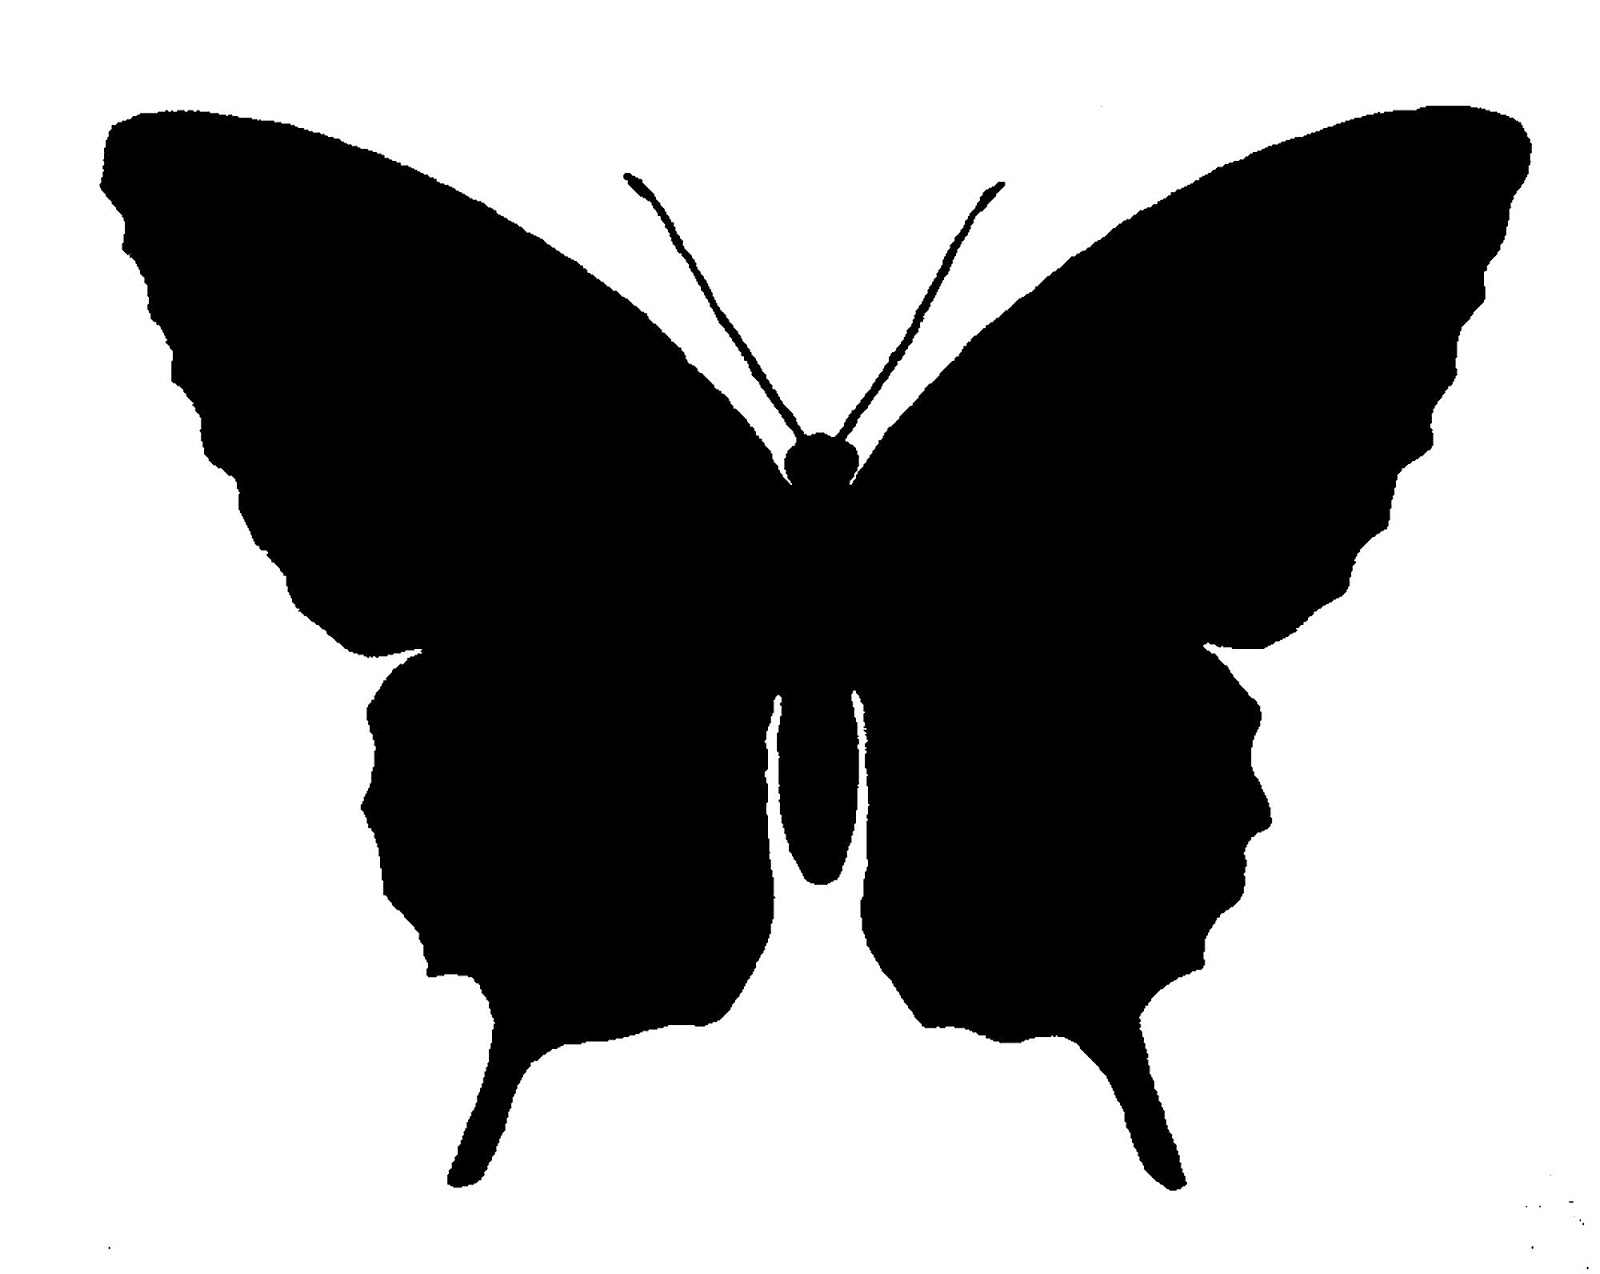 Download The Graphics Monarch: Free Butterfly Silhouette Image Grayscale Digital Supplies